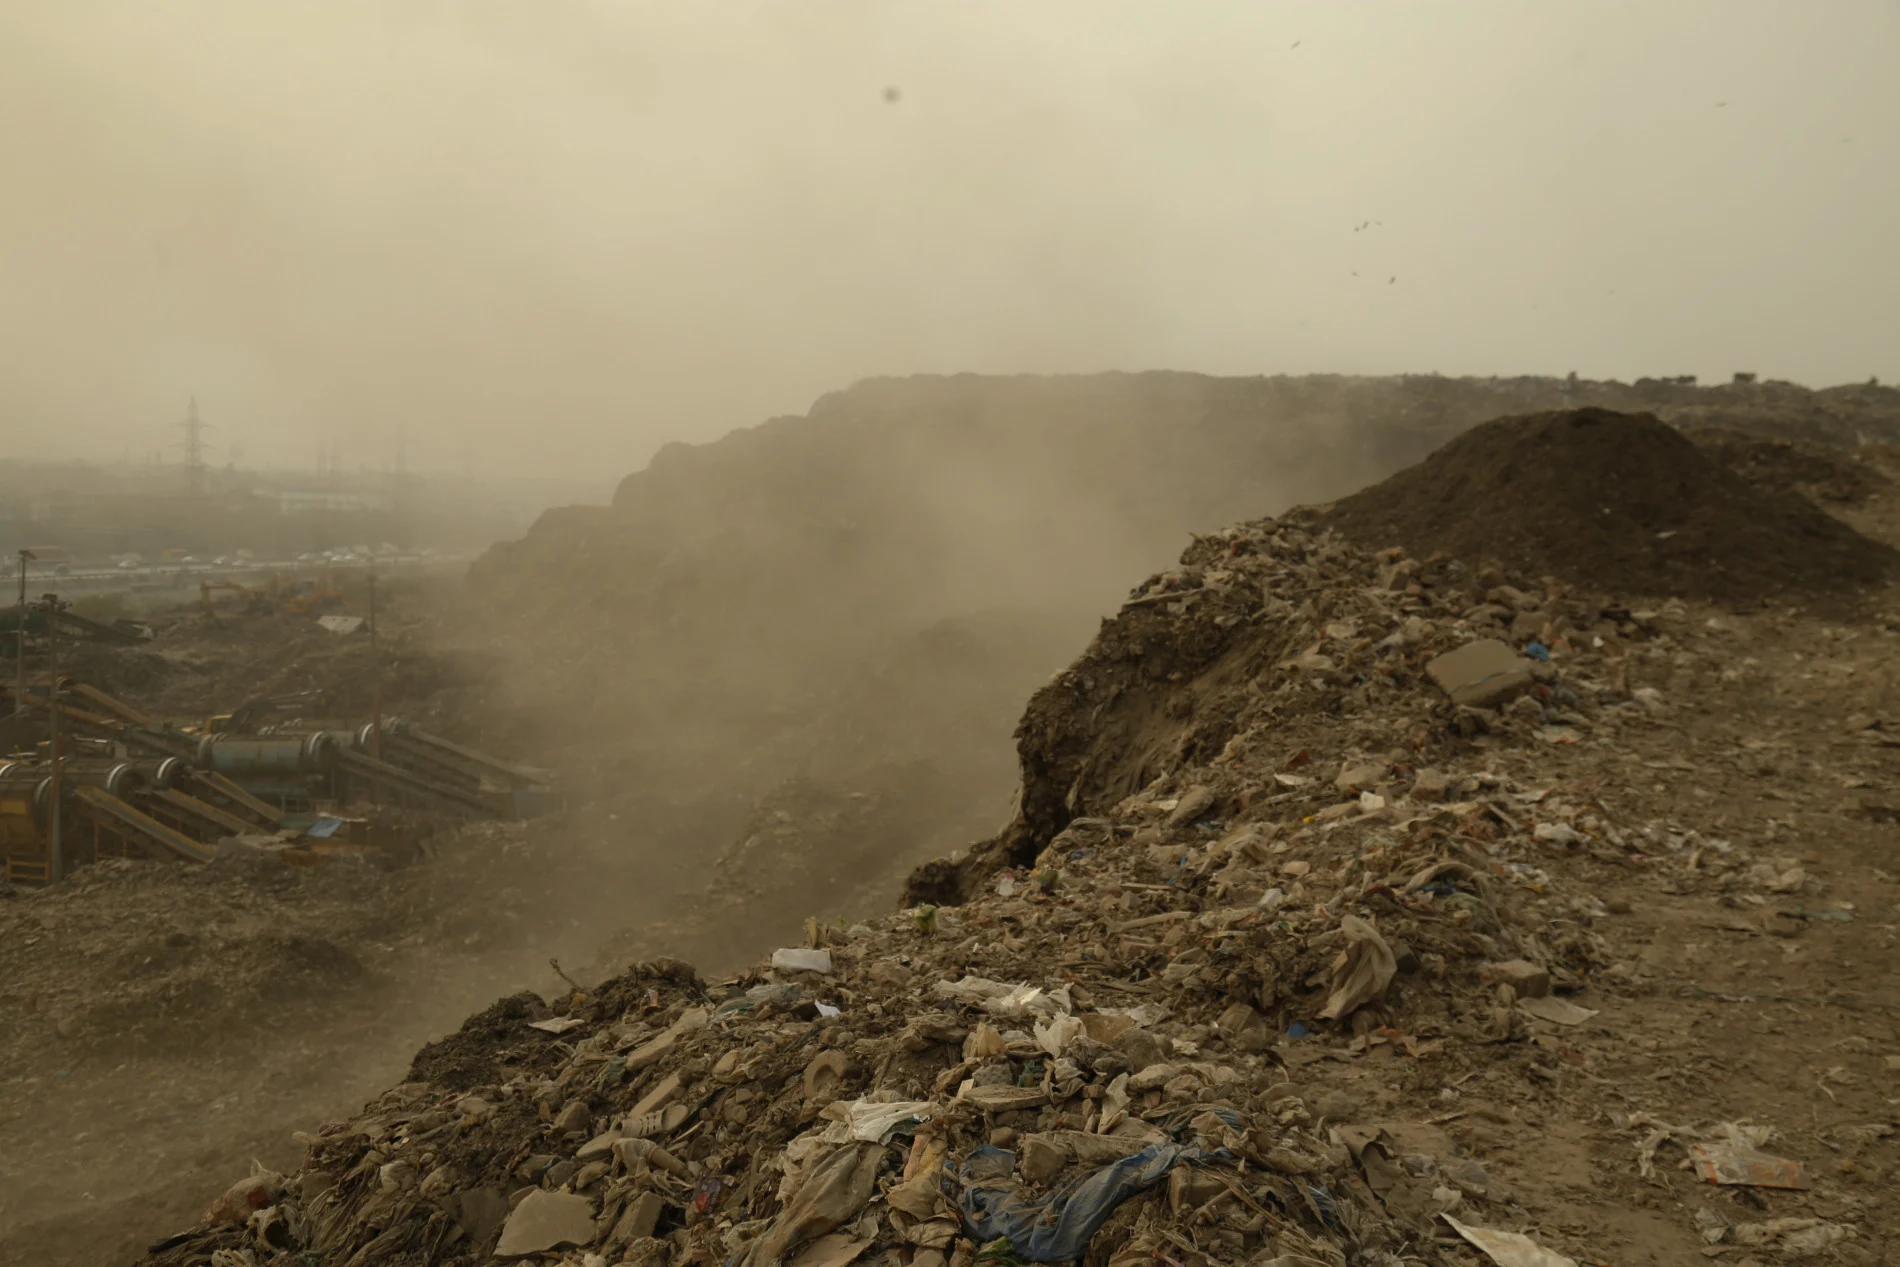 Bhalswa landfill in Delhi, India on May 3, 2022. The site has spread to more than 36 acres since 1994.(Reuters/ Haripriya Shaji/ Pacific Press/ Sipa USA)